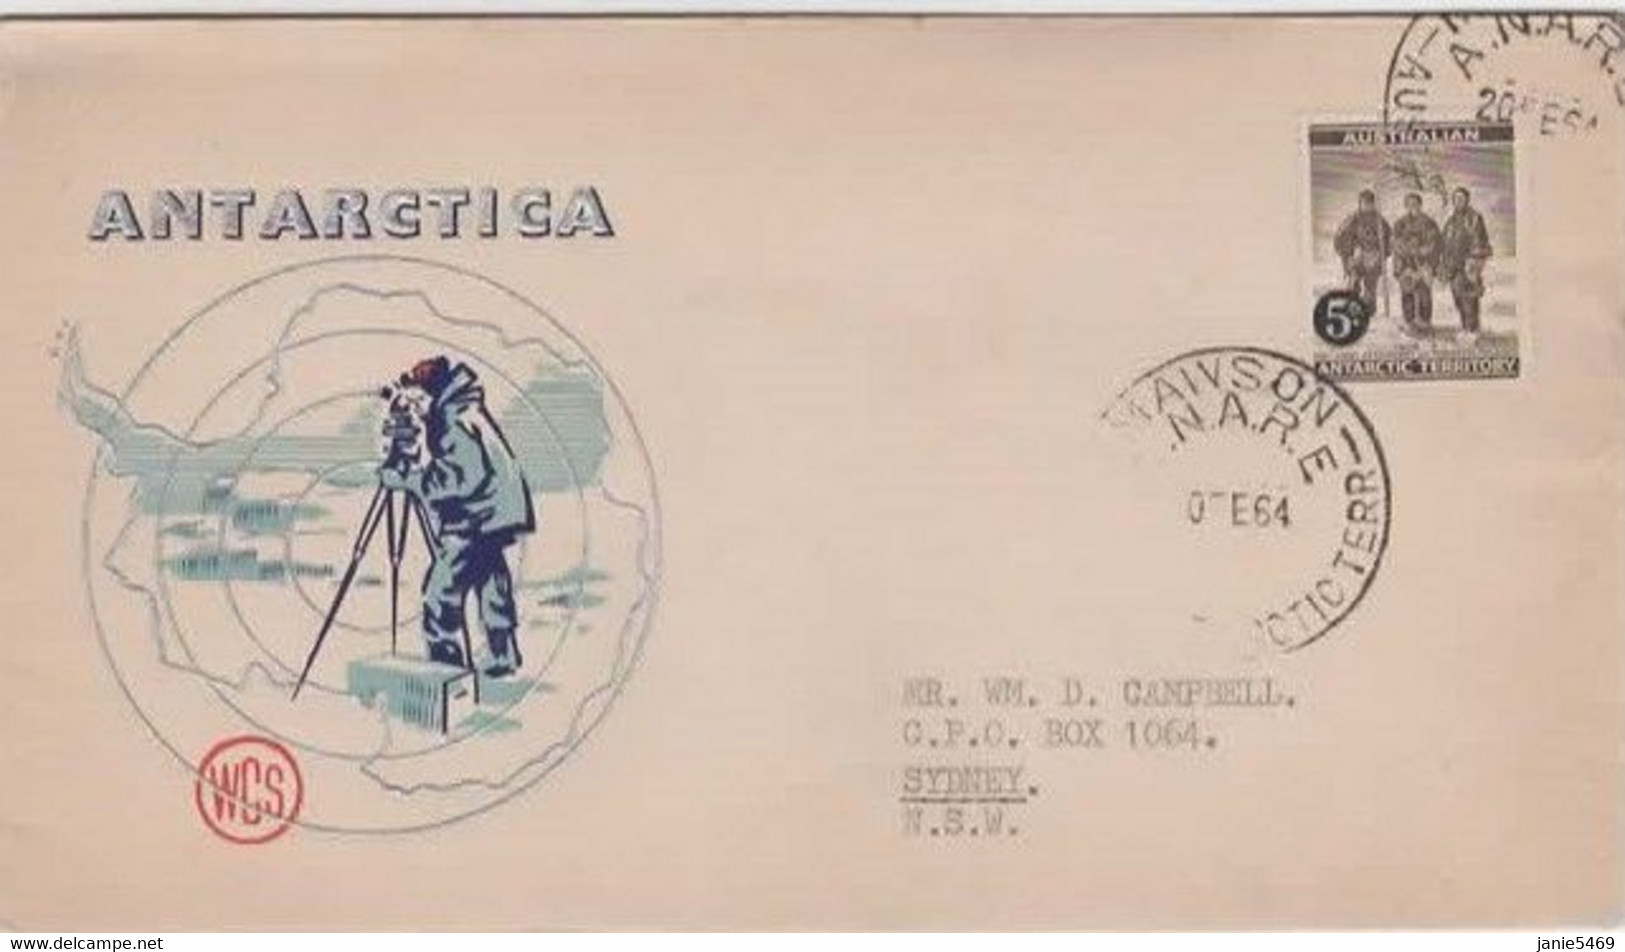 Australian Antarctic Territory,1964 5d Definitive Mawson Base Postmark,WCS First Day Cover - FDC